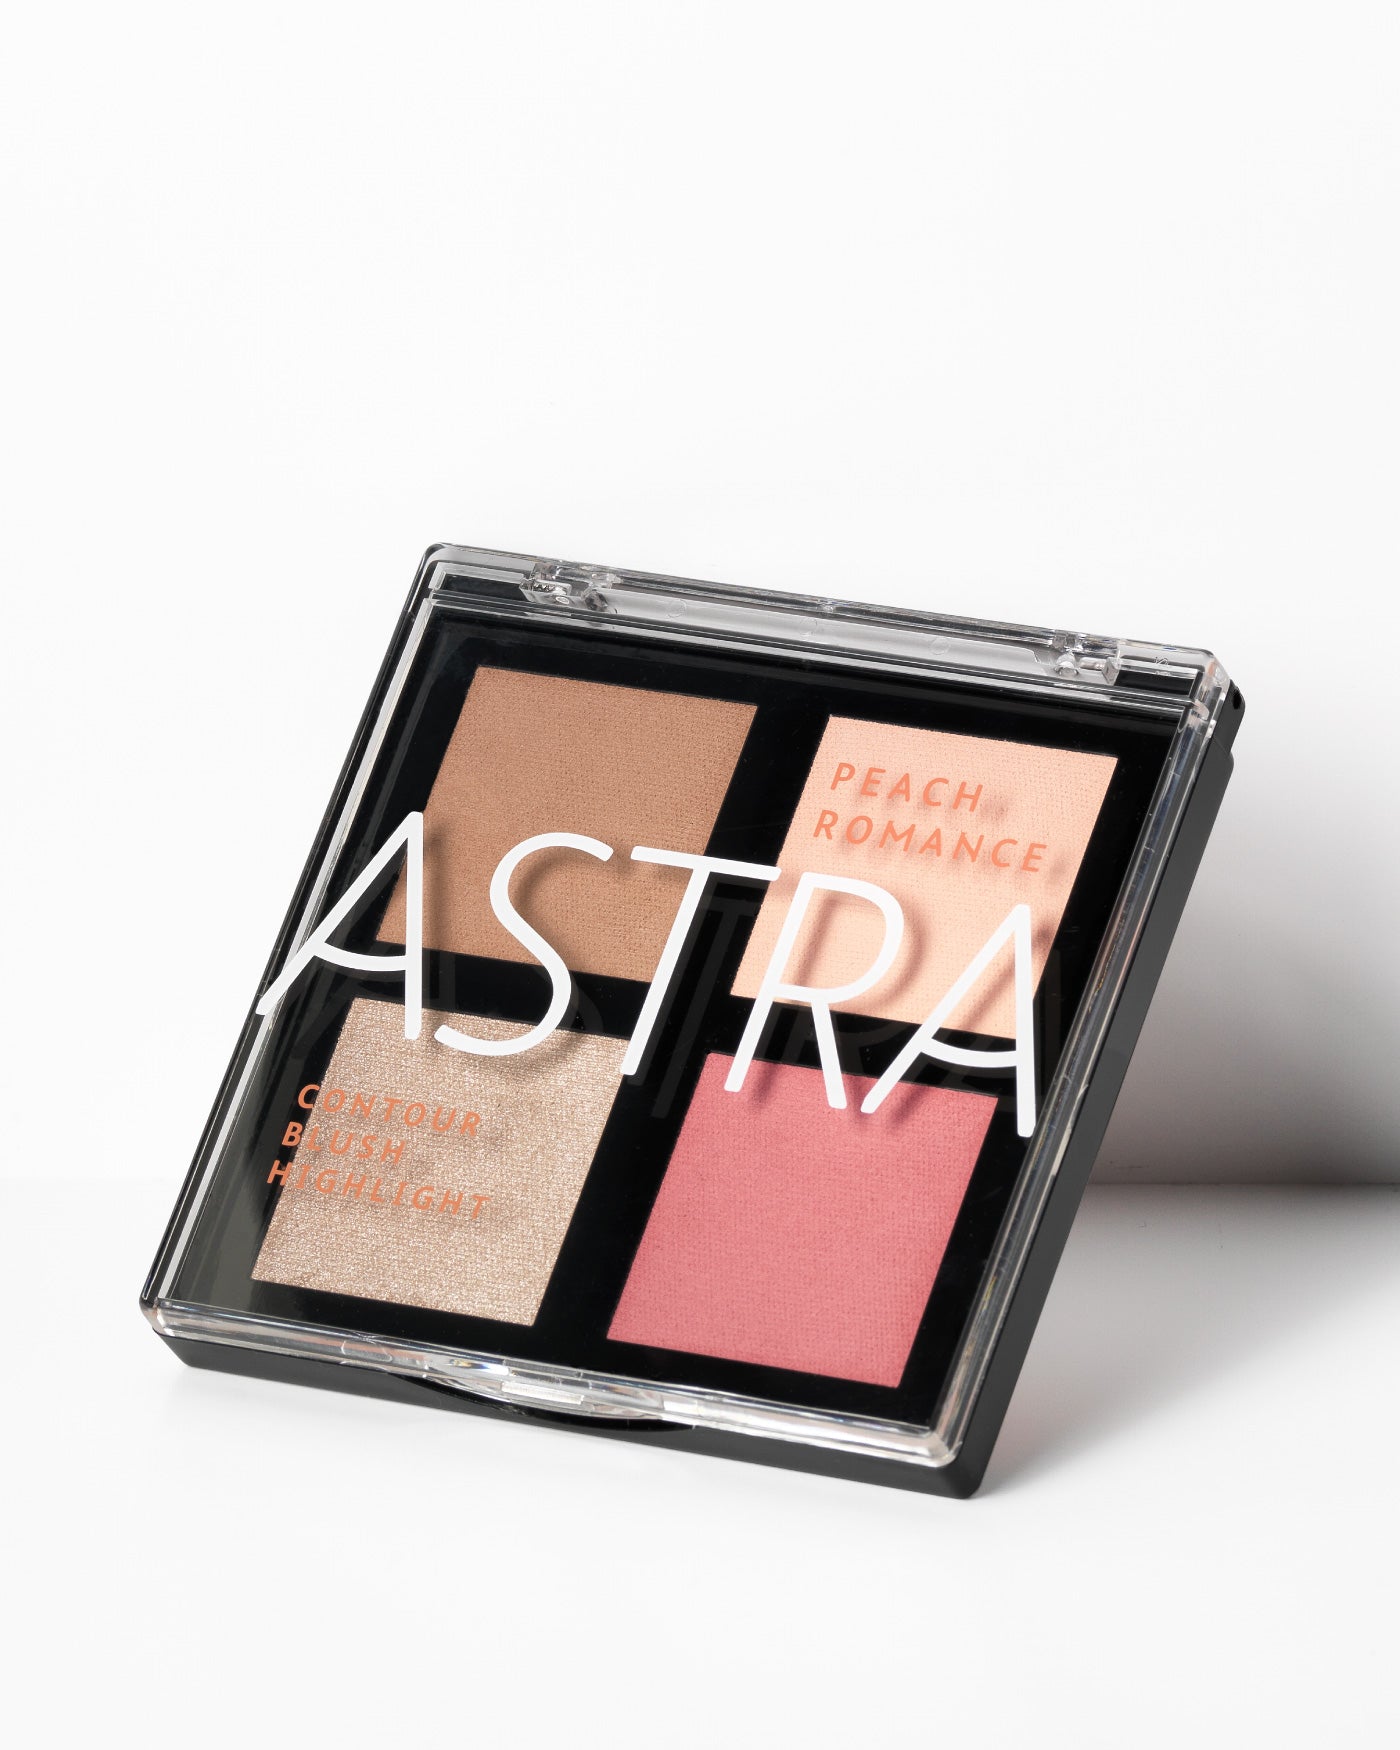 ROMANCE PALETTE - All Products - Astra Make-Up